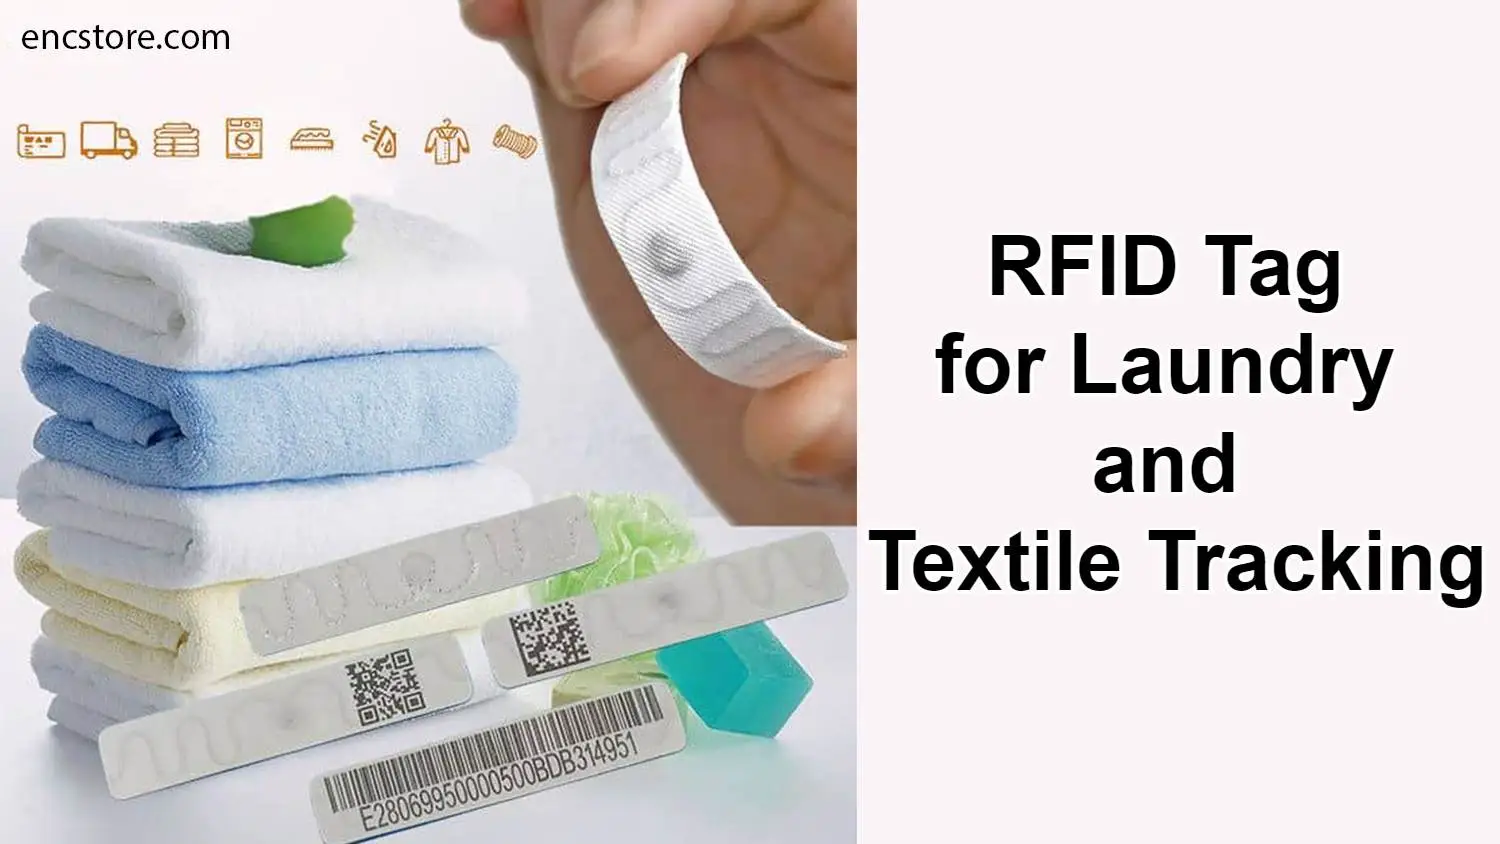 RFID Tag for Laundry and Textile Tracking